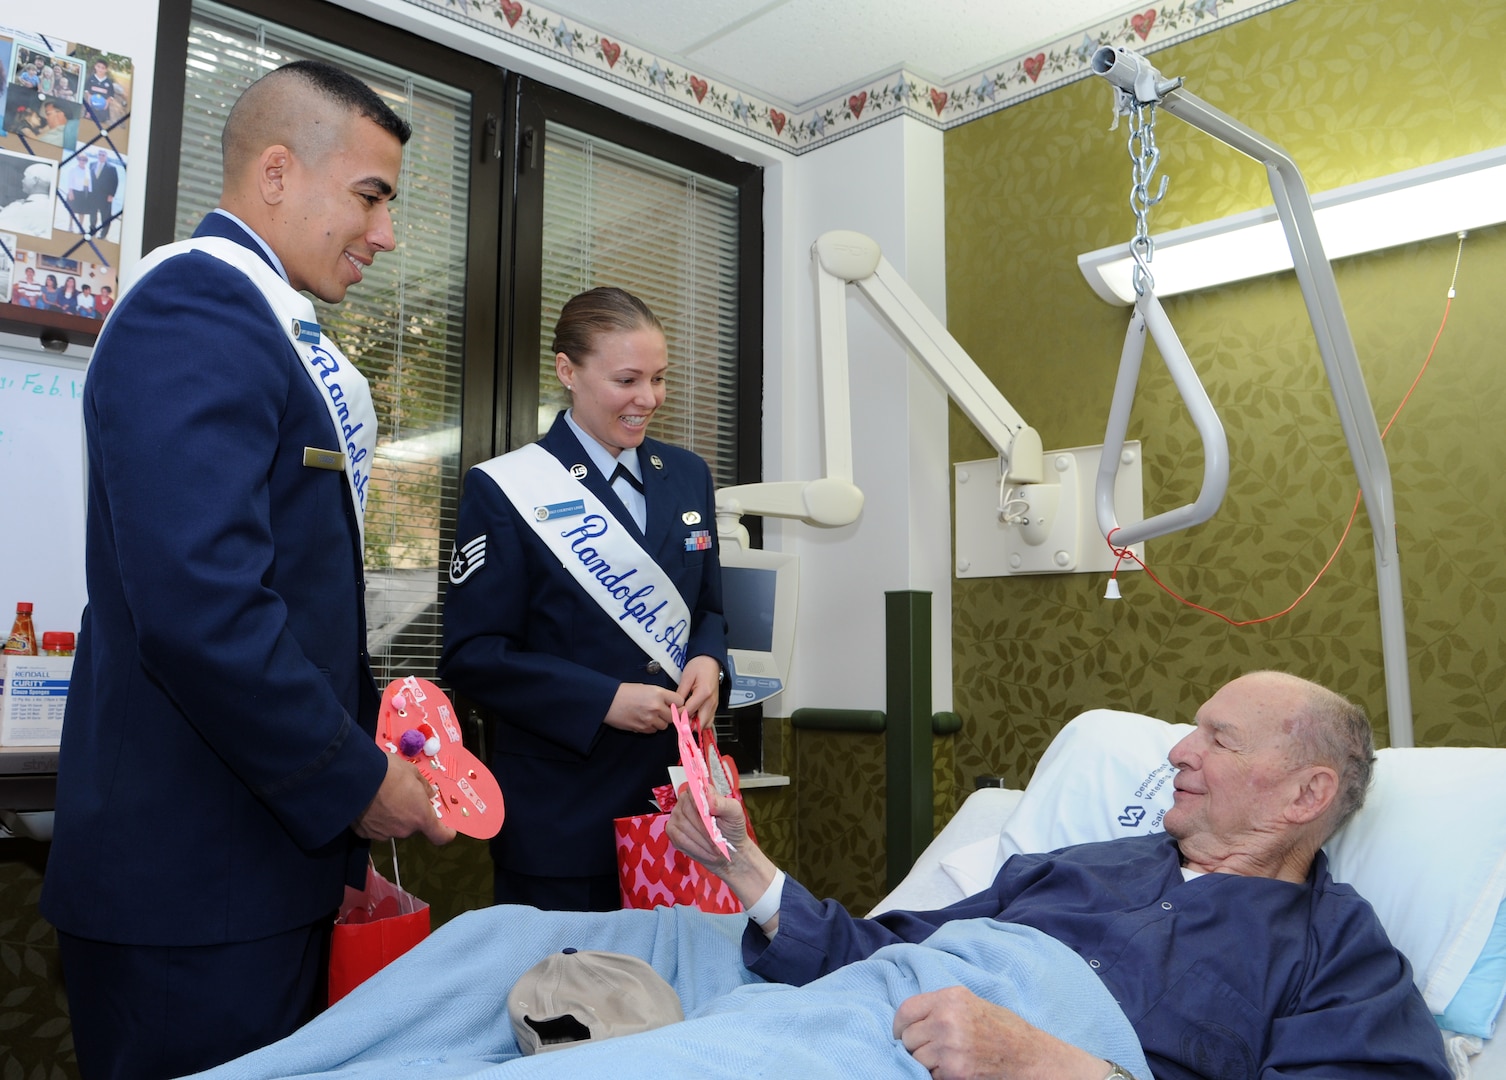 Capt. Carlos Ferrer, 341st Recruiting Squadron, and Staff Sgt. Courtney Linde, 12th Contracting Squadron, both Randolph Ambassadors, deliver hand-made Valentine's Day cards to Thomas Black Jr, a retired Air Force veteran at Audie L. Murphy Memorial Veterans Hospital, on Feb. 13 as part of the annual National Salute to Hospitalized Veterans Program. Col. Jacqueline Van Ovost, 12th FTW commander, and Chief Master Sgt. Max Grindstaff, 12th FTW command chief master sergeant joined the ambassadors in wishing good health to fellow veterans and thanking them for their service. (U.S. Air Force photo by Don Lindsey)